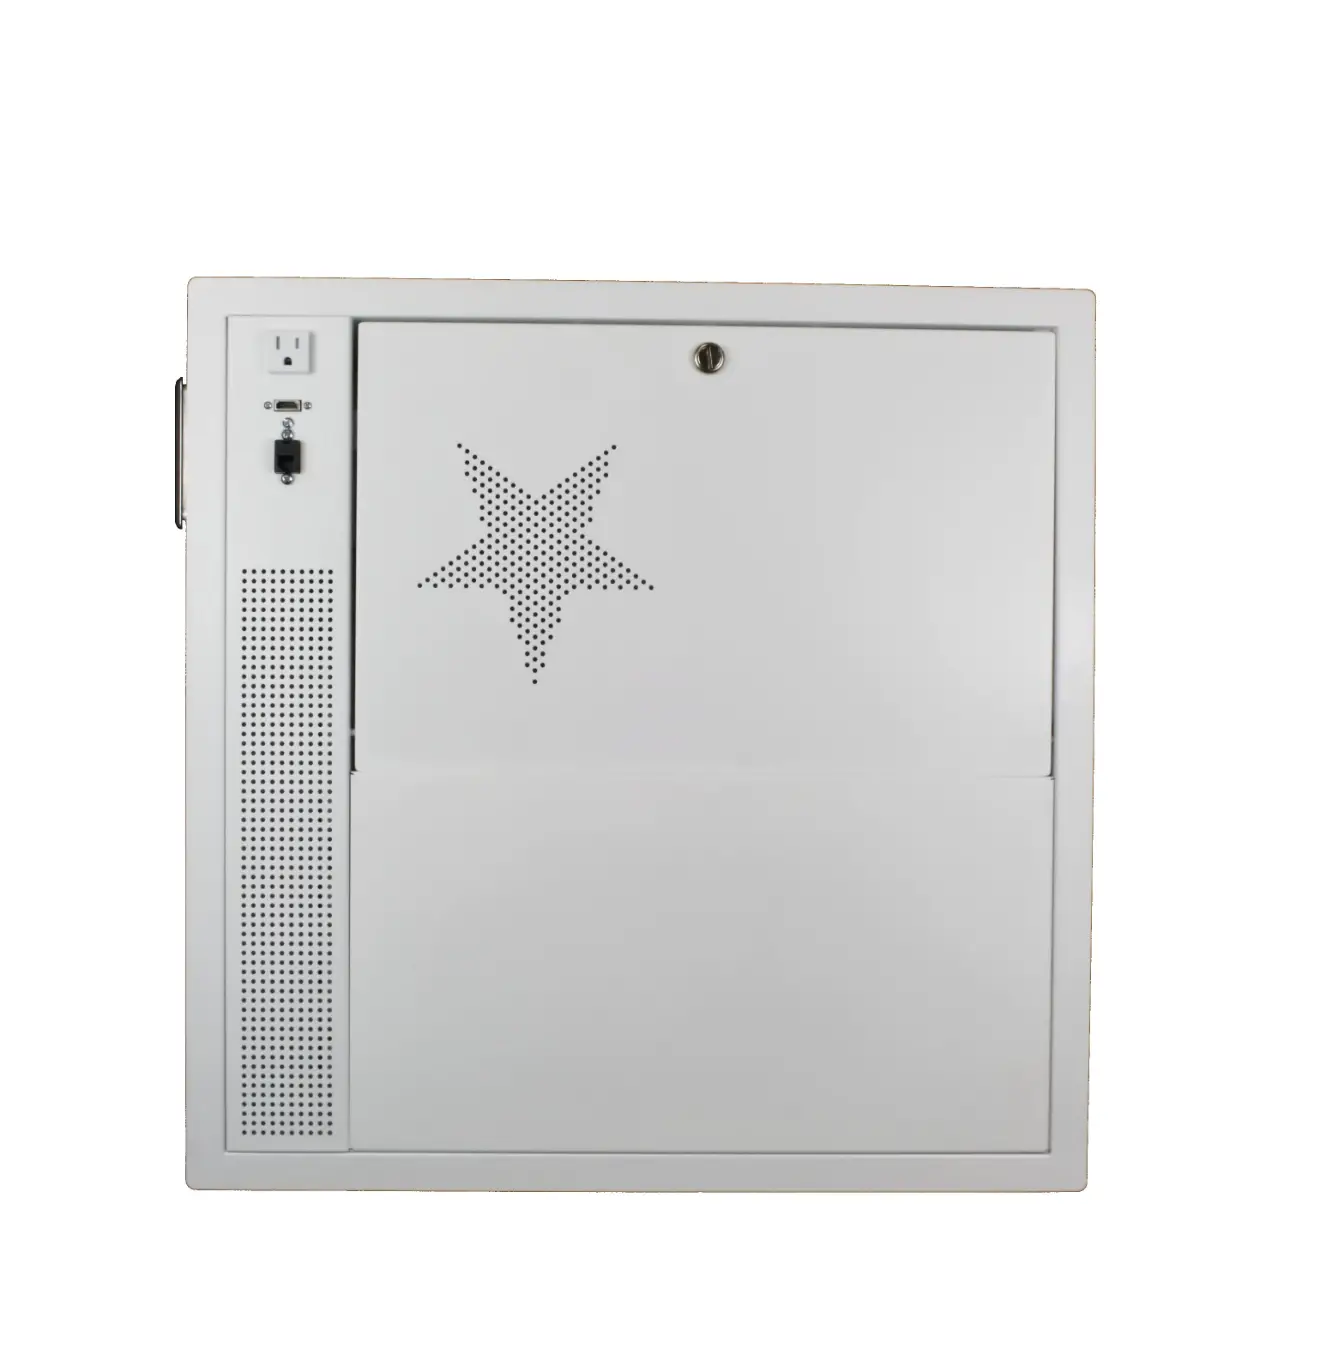 Ceiling mounting plate